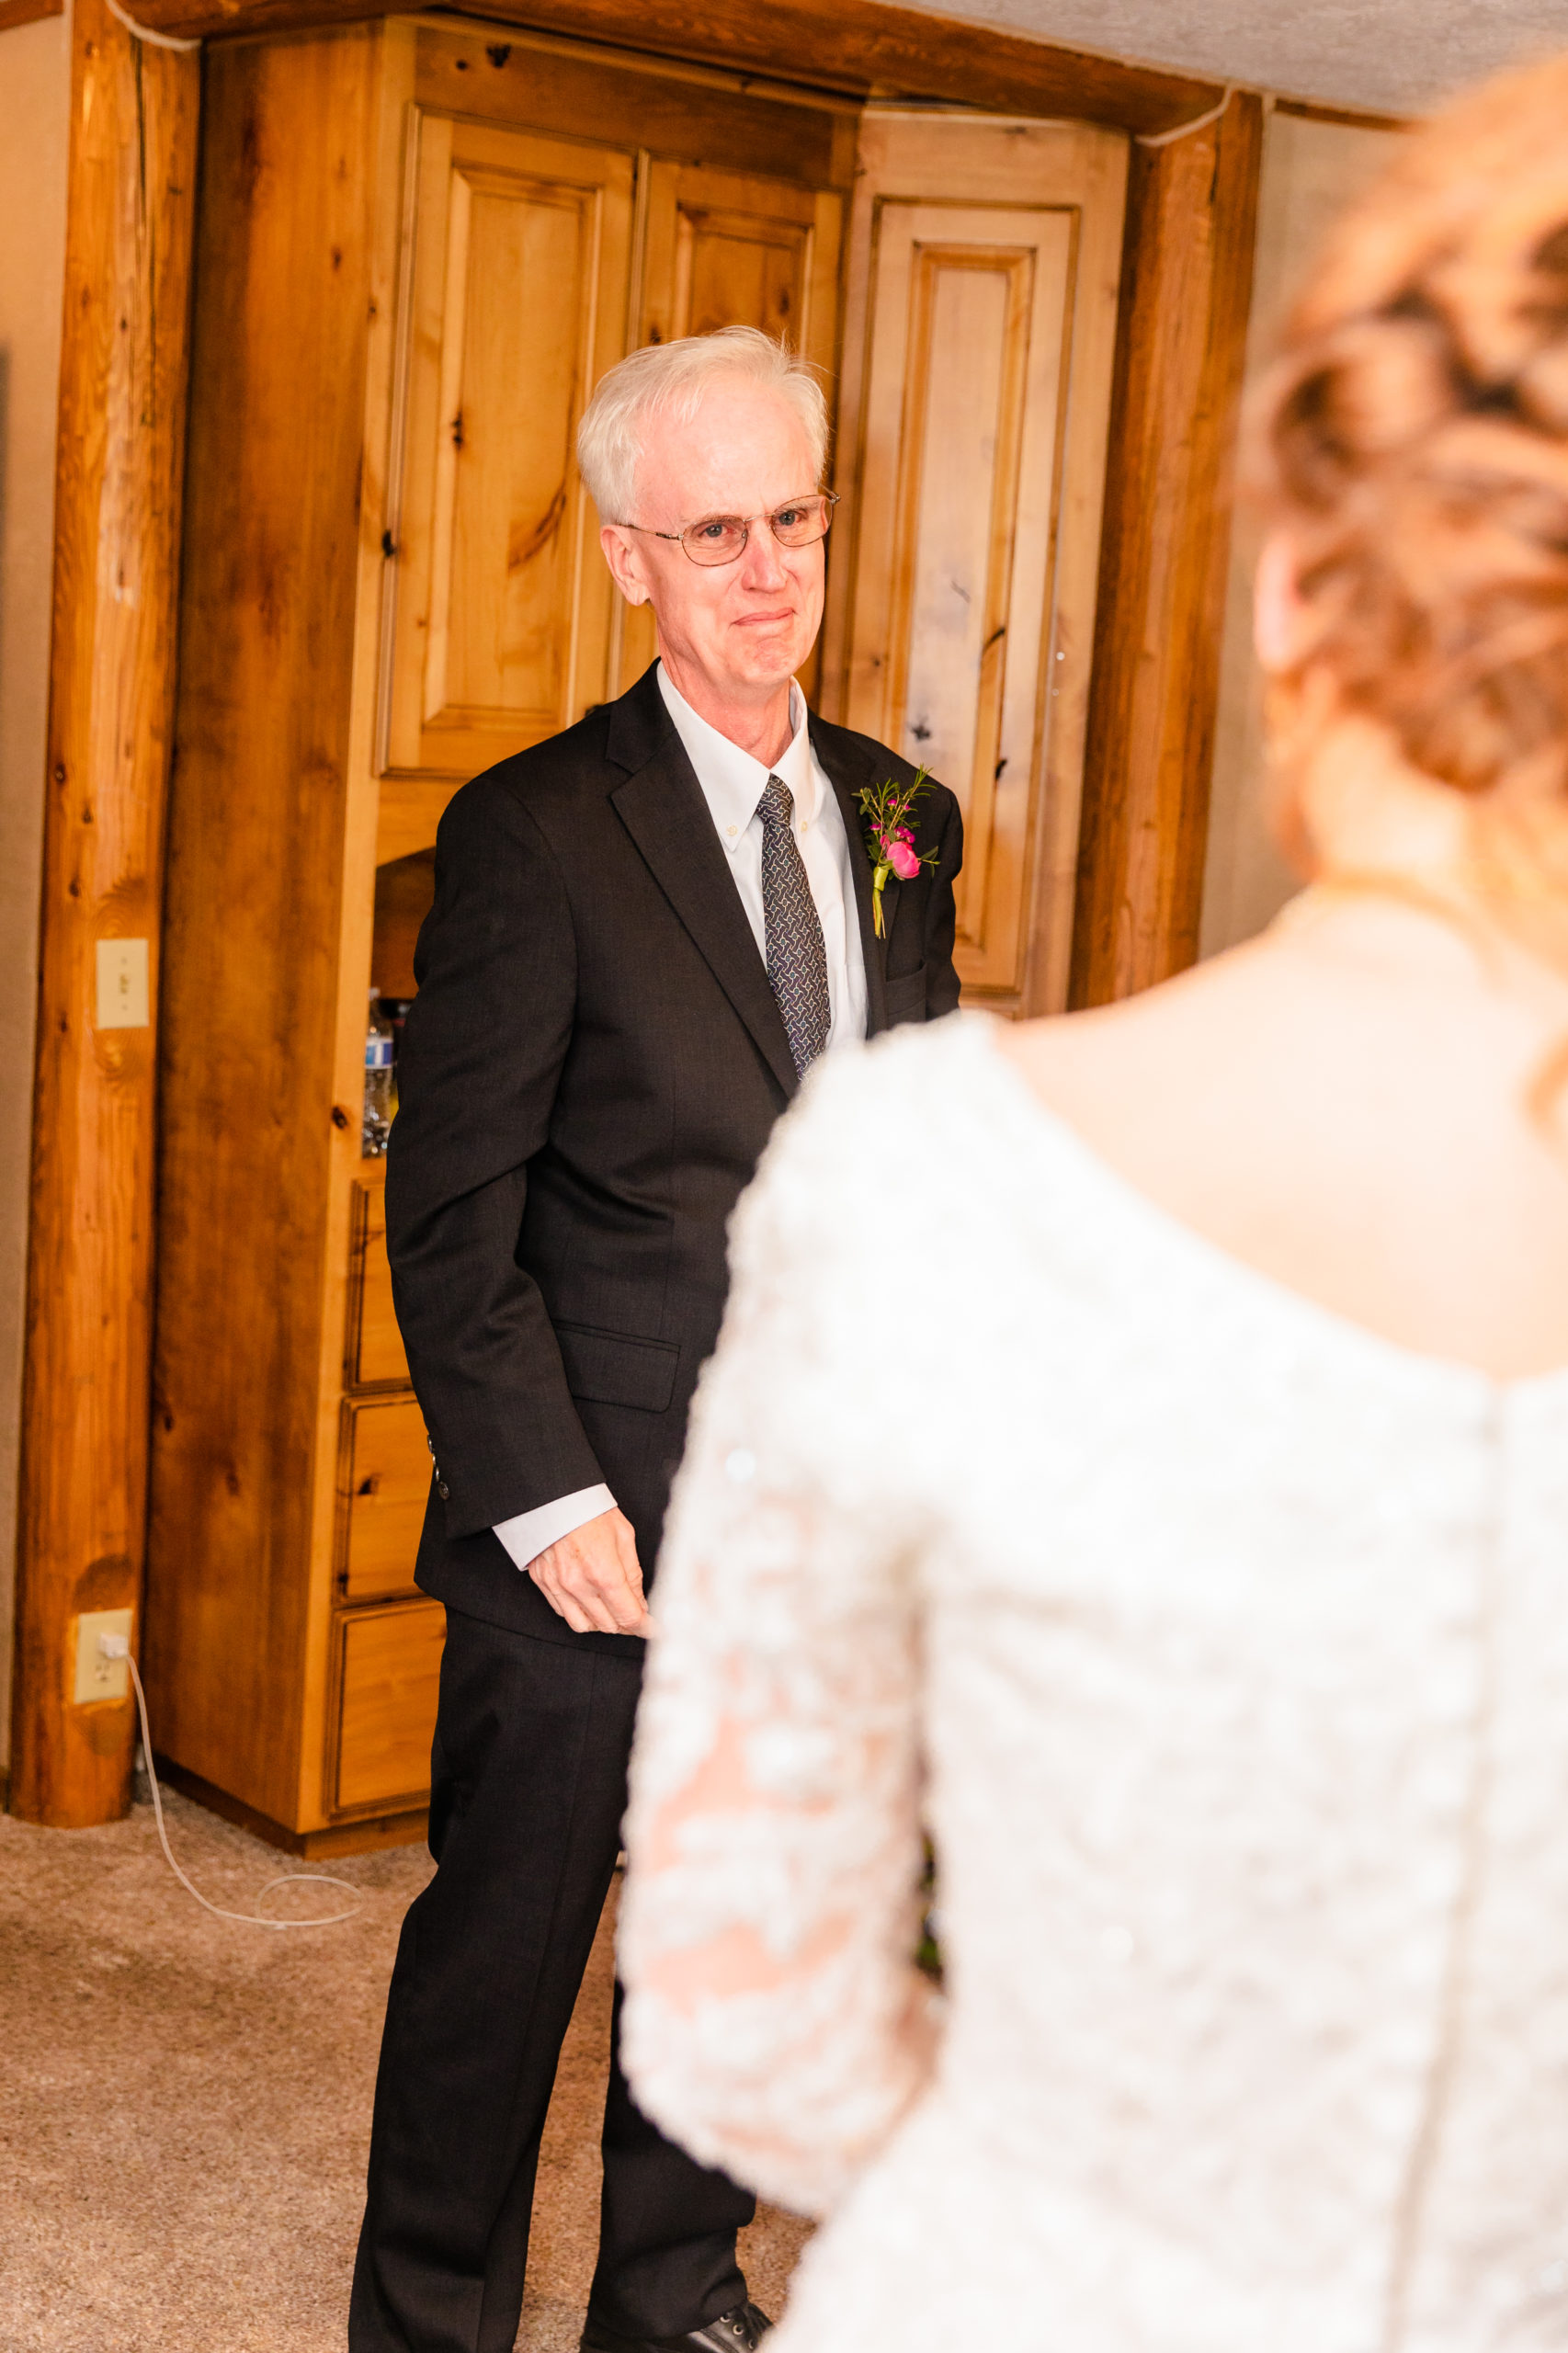 dress reveal to father of the bride with father crying emotional 